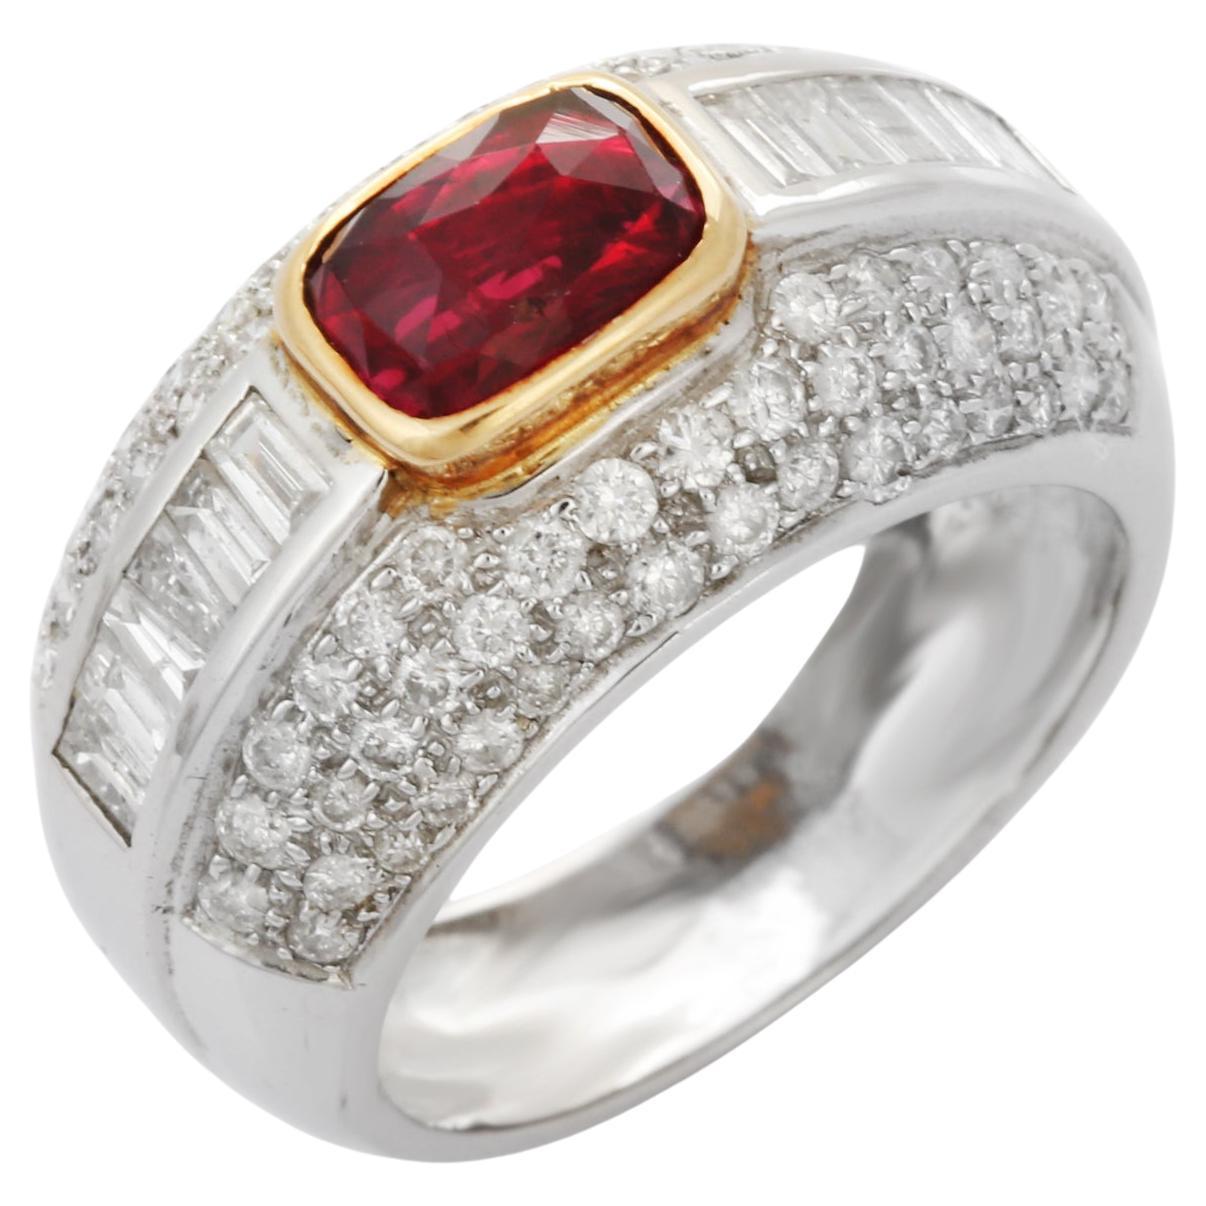 For Sale:  Natural Cushion Cut Ruby and Diamond Cluster Ring in 18K White Gold